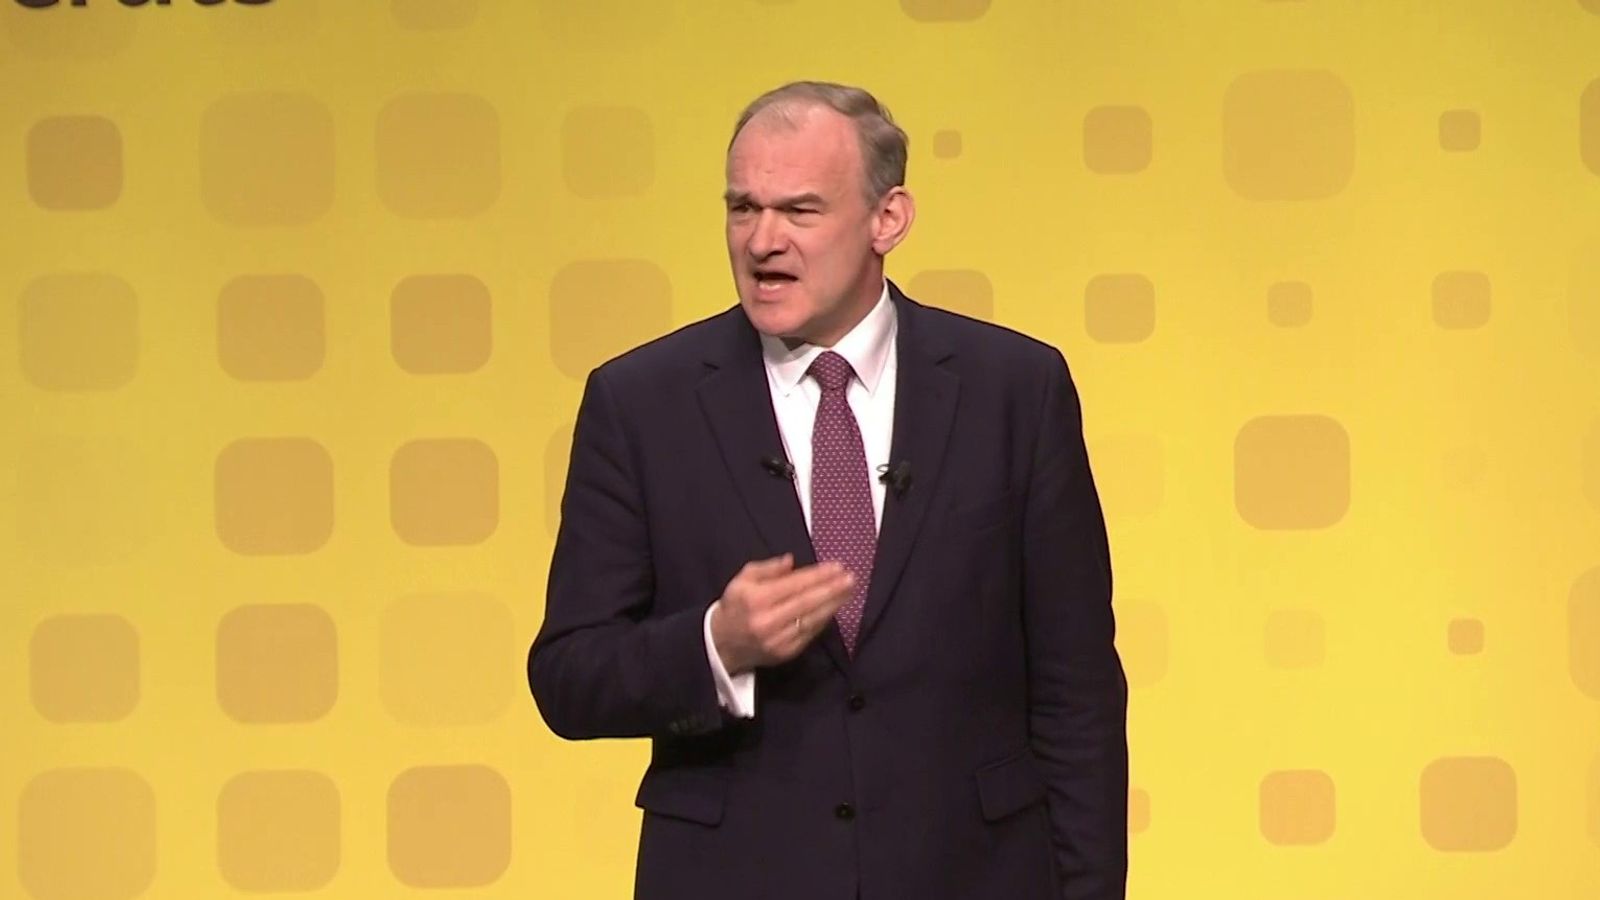 Liberal Democrat conference: Tear down 'Tory' trade barriers with Europe to boost economy, says Ed Davey